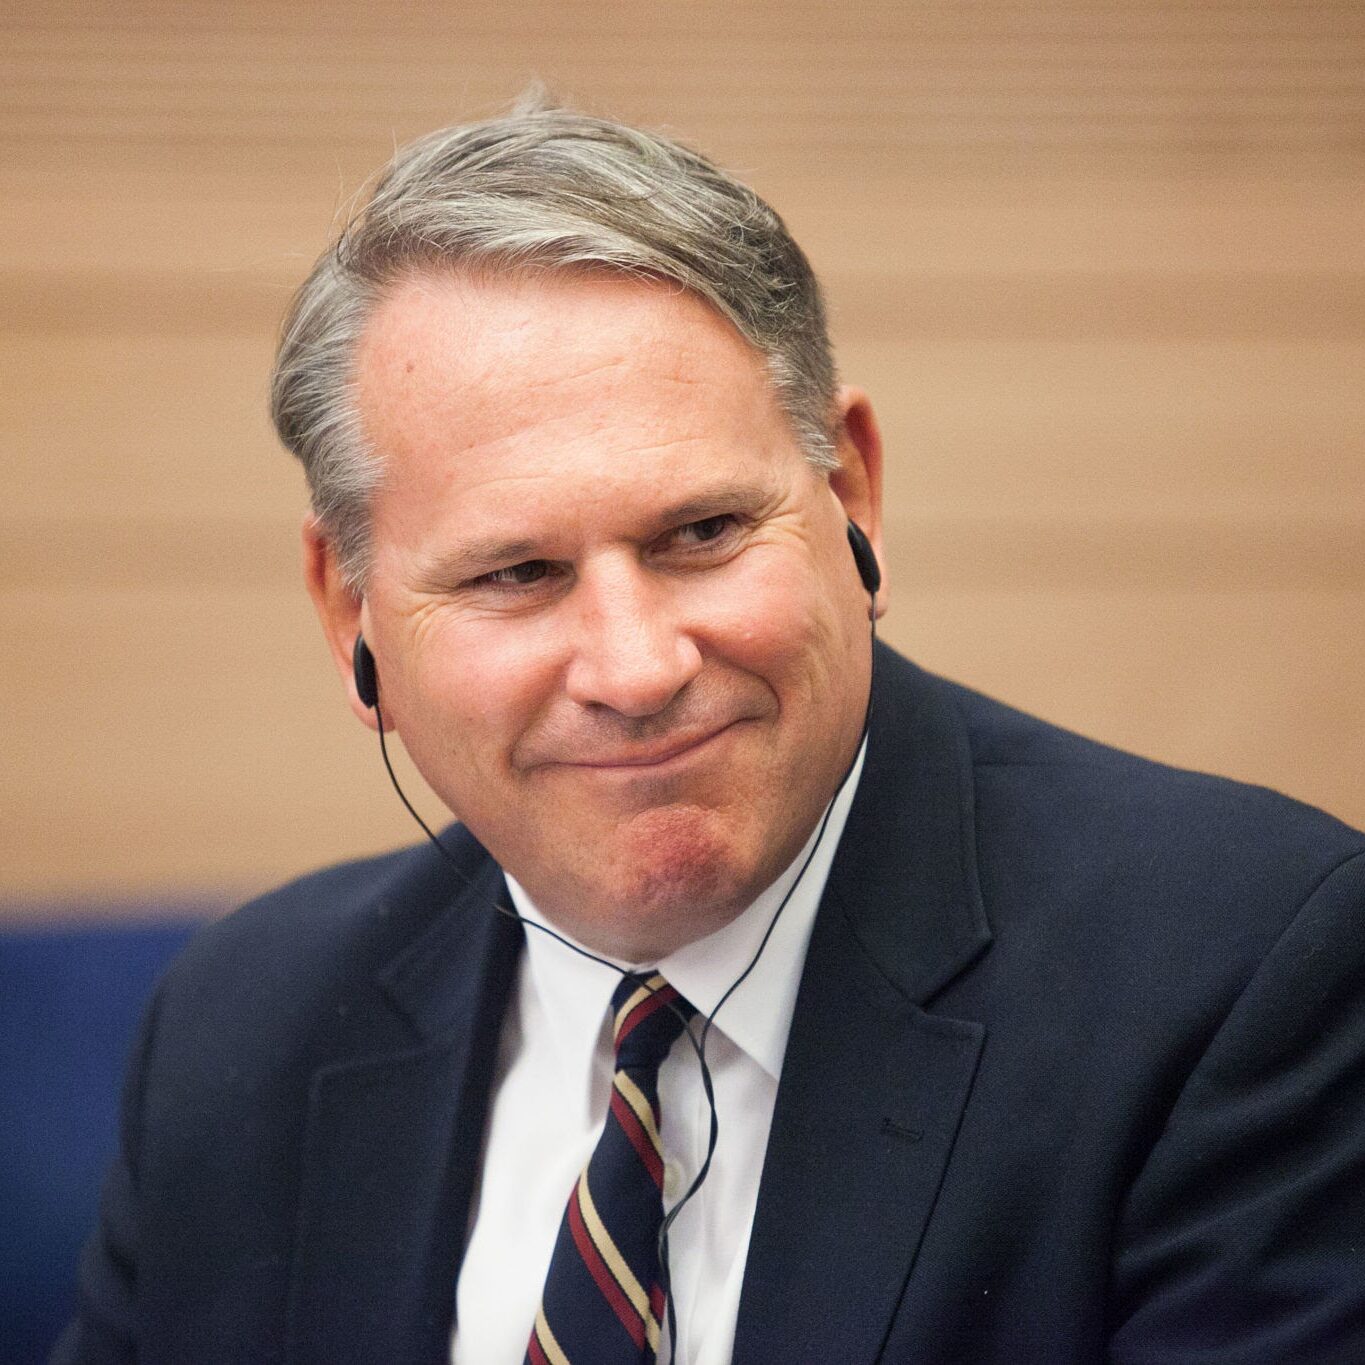 Colonel Richard Kemp a retired British Army officer, who was Commander of British Forces in Afghanistan is seen during a session at the Foreign Affairs and Defense Committee at the Israeli parliament the knesset. The committee held a discussion about the modern urban battle ground and the challenges it places for modern armies. Kemp, a supporter of Israel was apparently brought as a preparation for the upcoming international committee of inquiry that will assemble to deal with the recent round of violence between Israel and Palestinian militants in the Gaza Strip. (Photo by Omer Messinger/NurPhoto) (Photo by NurPhoto/Corbis via Getty Images)